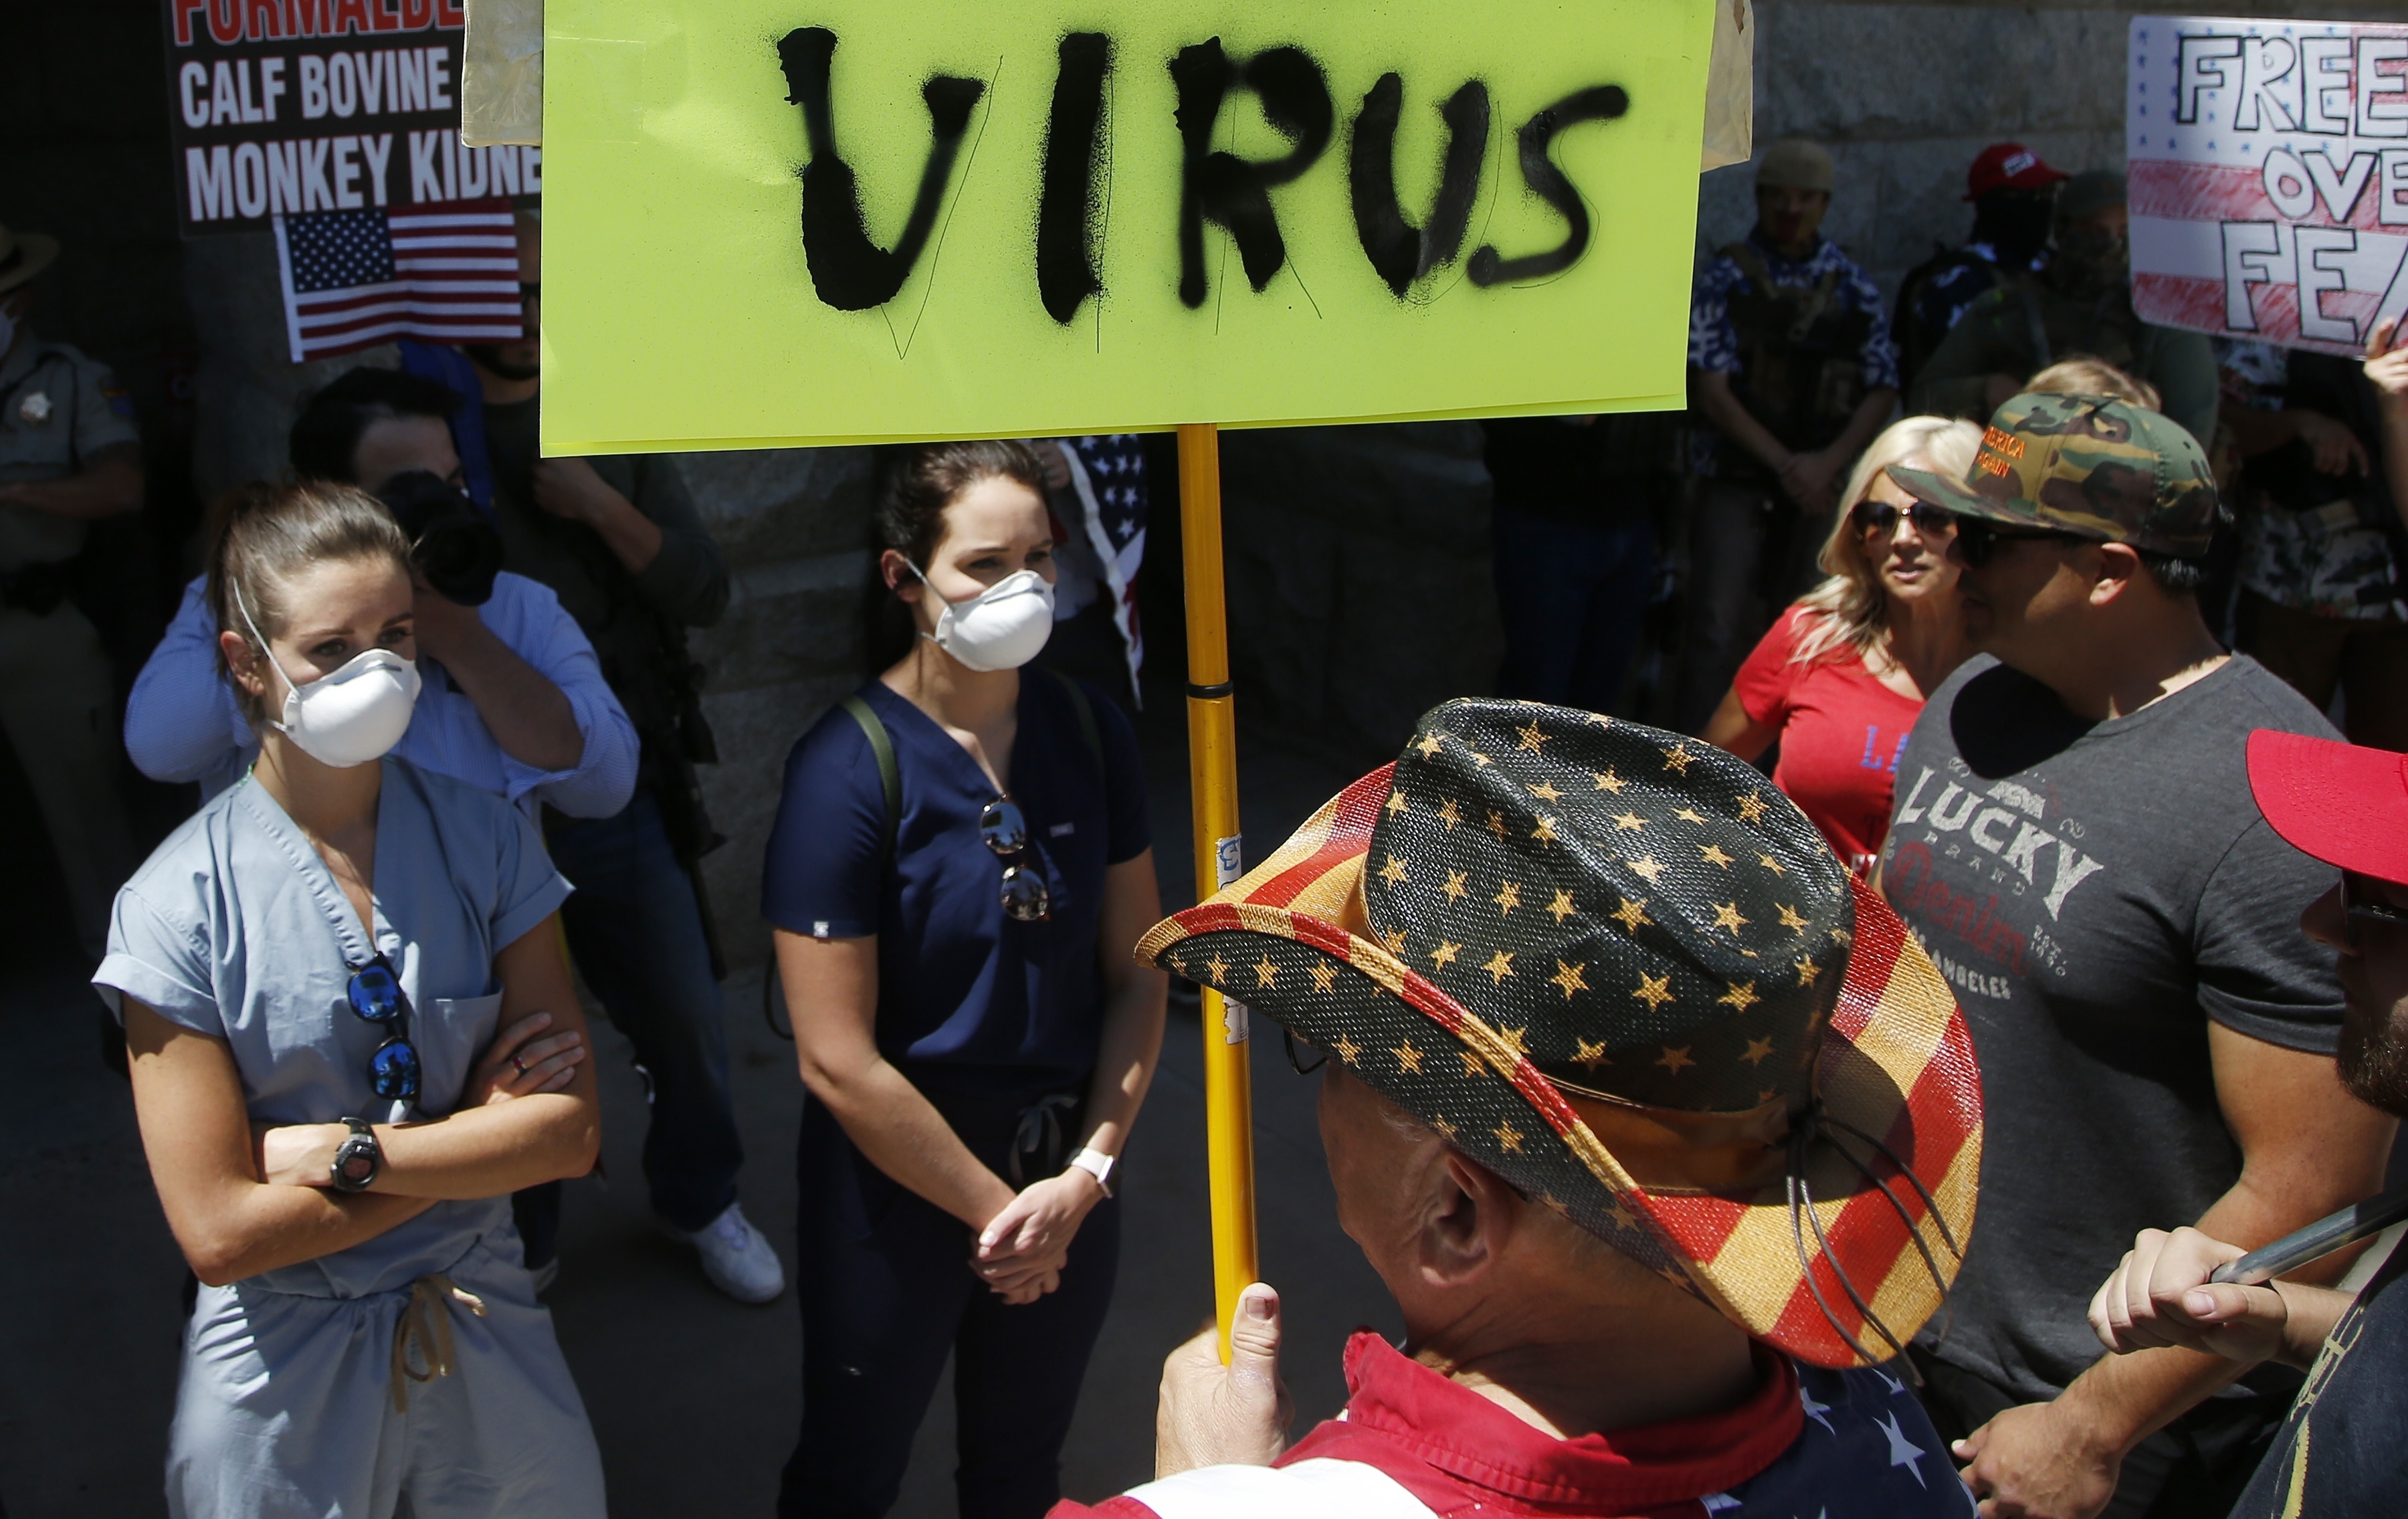 Caregivers stand in front of protesters at the main entrance to the Arizona Capitol at a rally to 're-open' Arizona against the governor's stay-at-home order due to the coronavirus Monday, April 20, 2020, in Phoenix. (AP Photo/Ross D. Franklin)